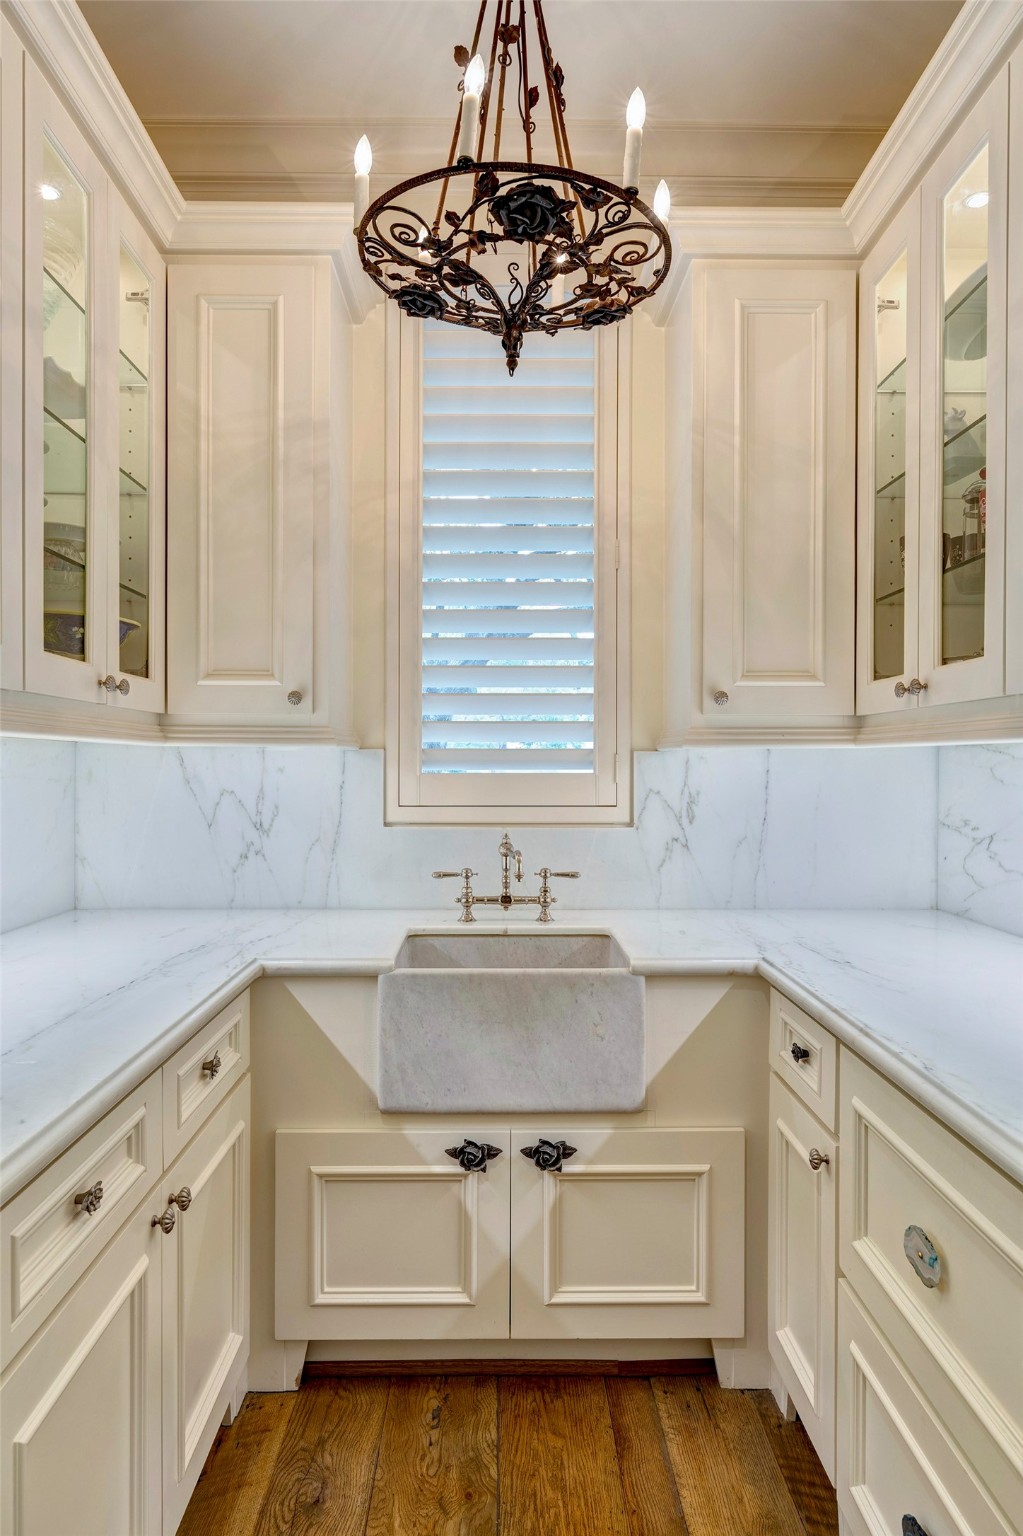 Butler's pantry off kitchen and dining with marble counters and sink with great storage